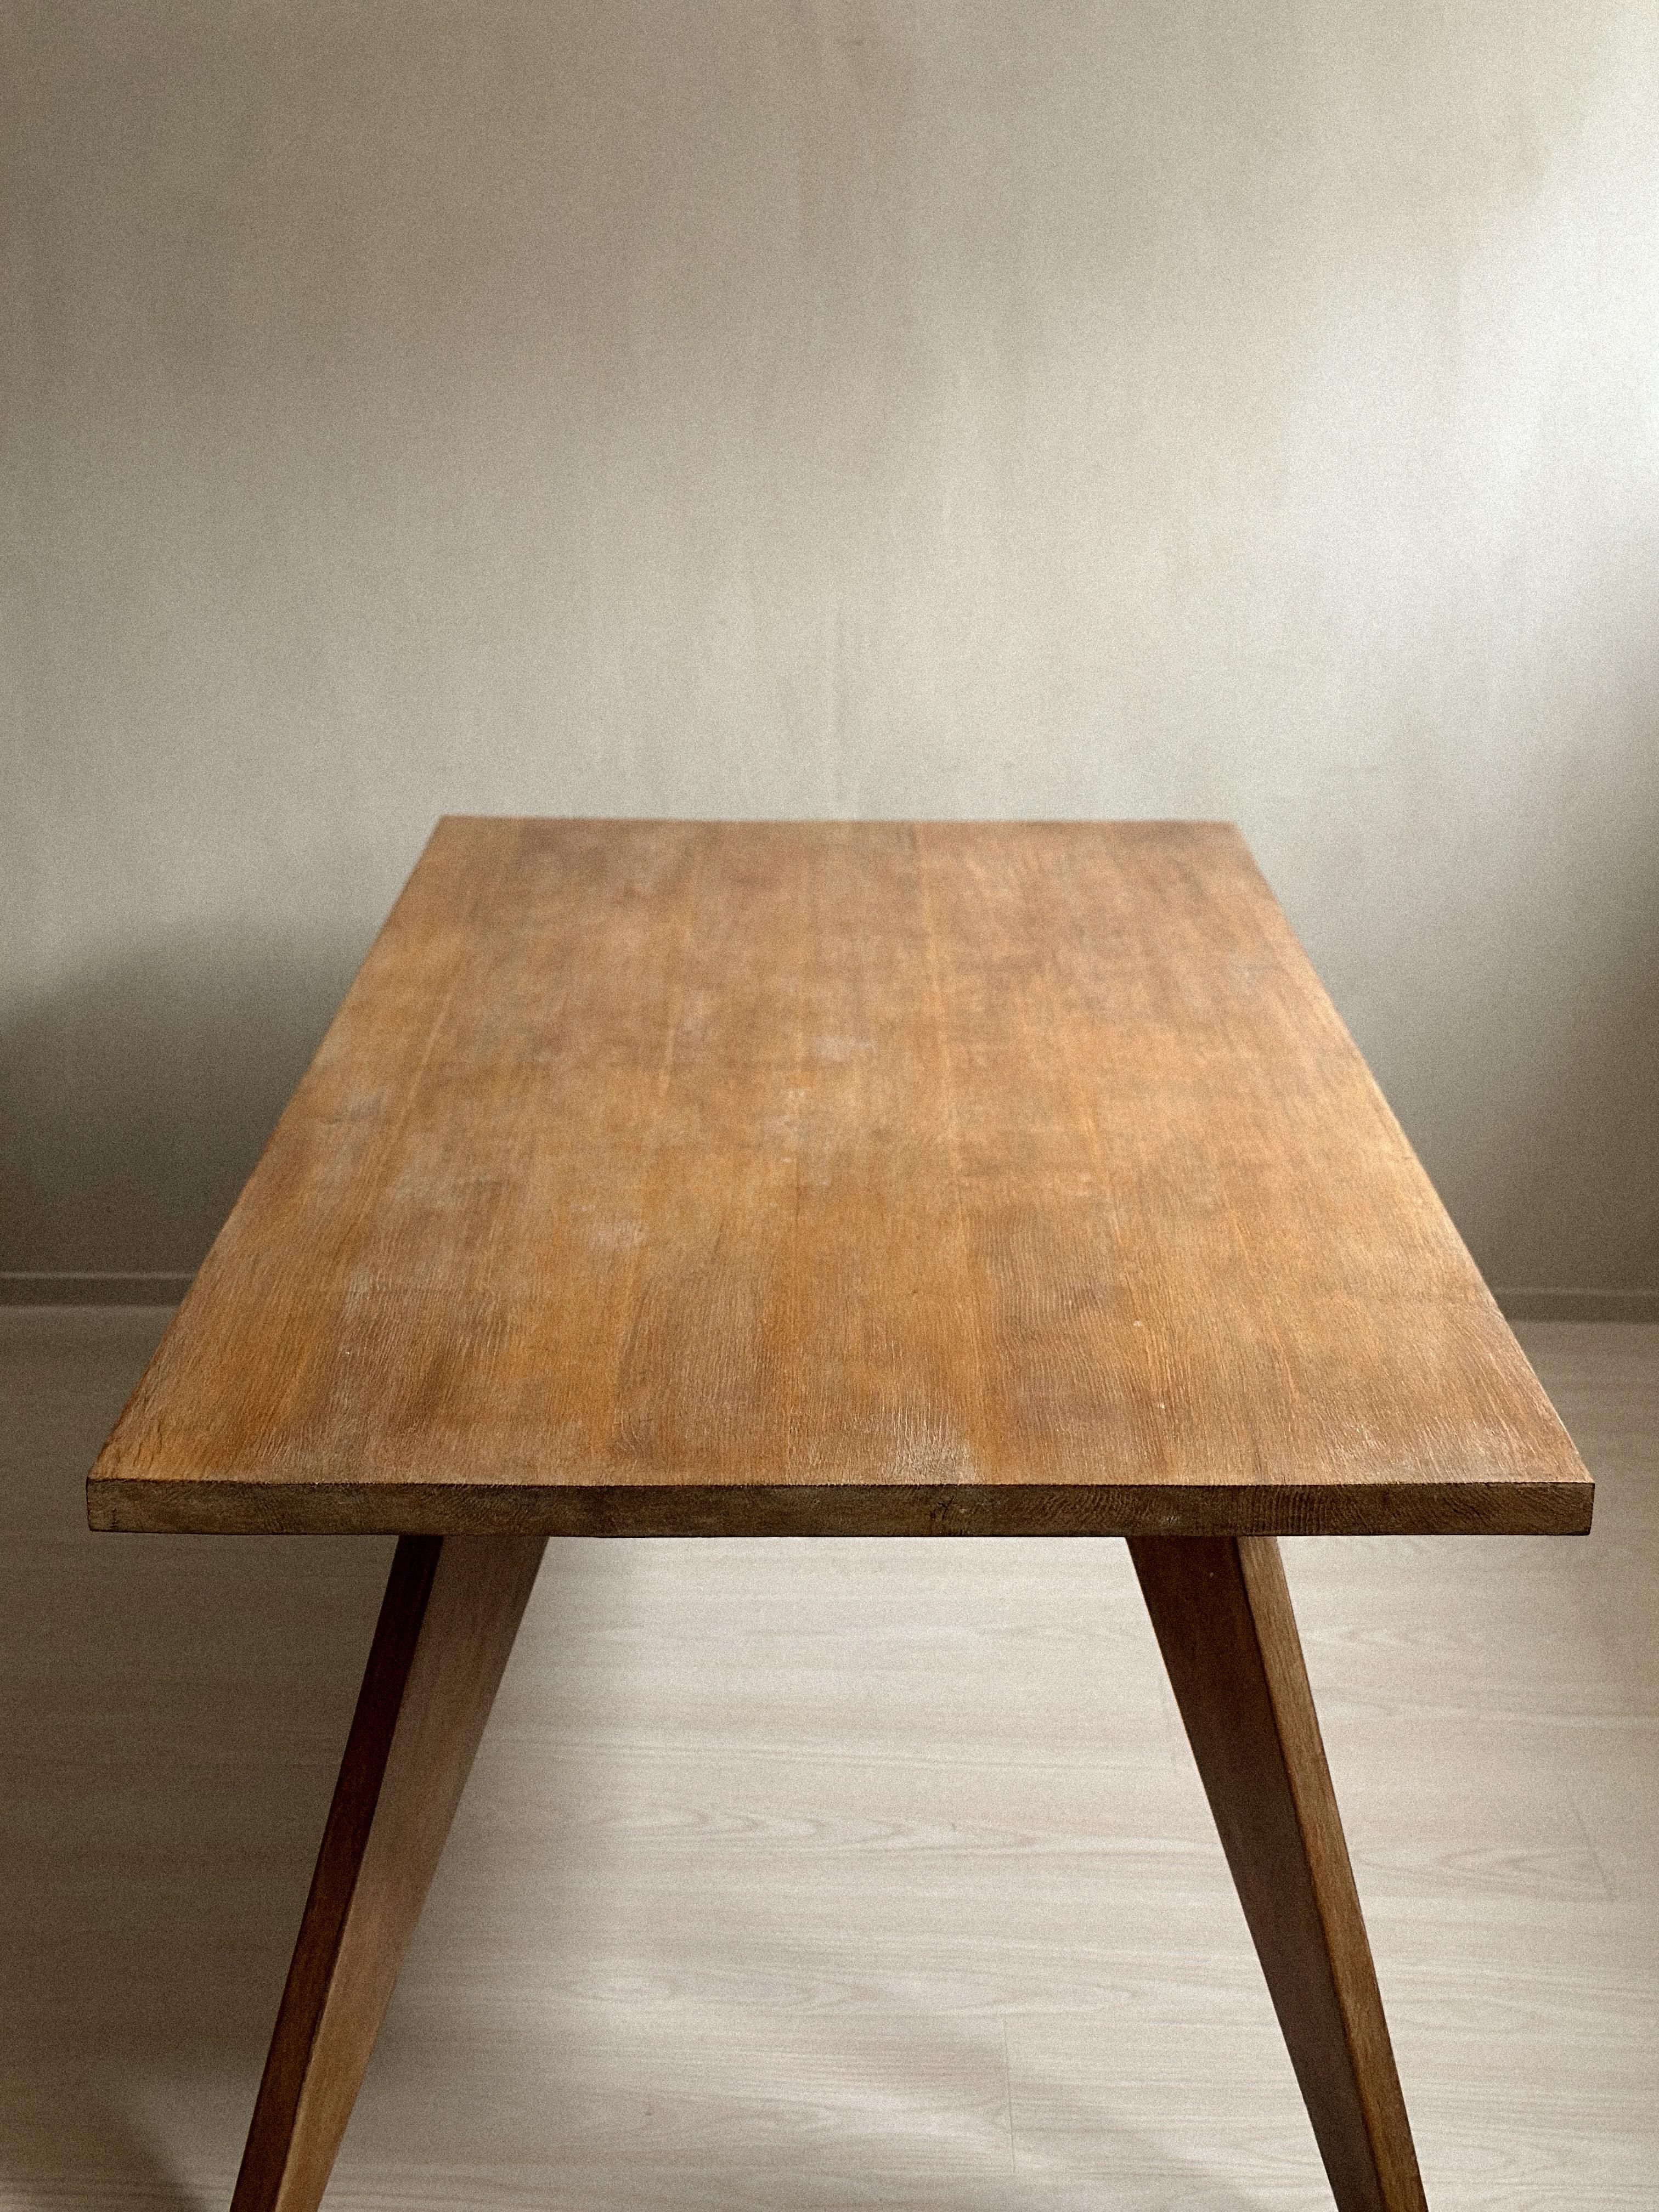 20th Century Dining Table in style of Jean Prouvé 